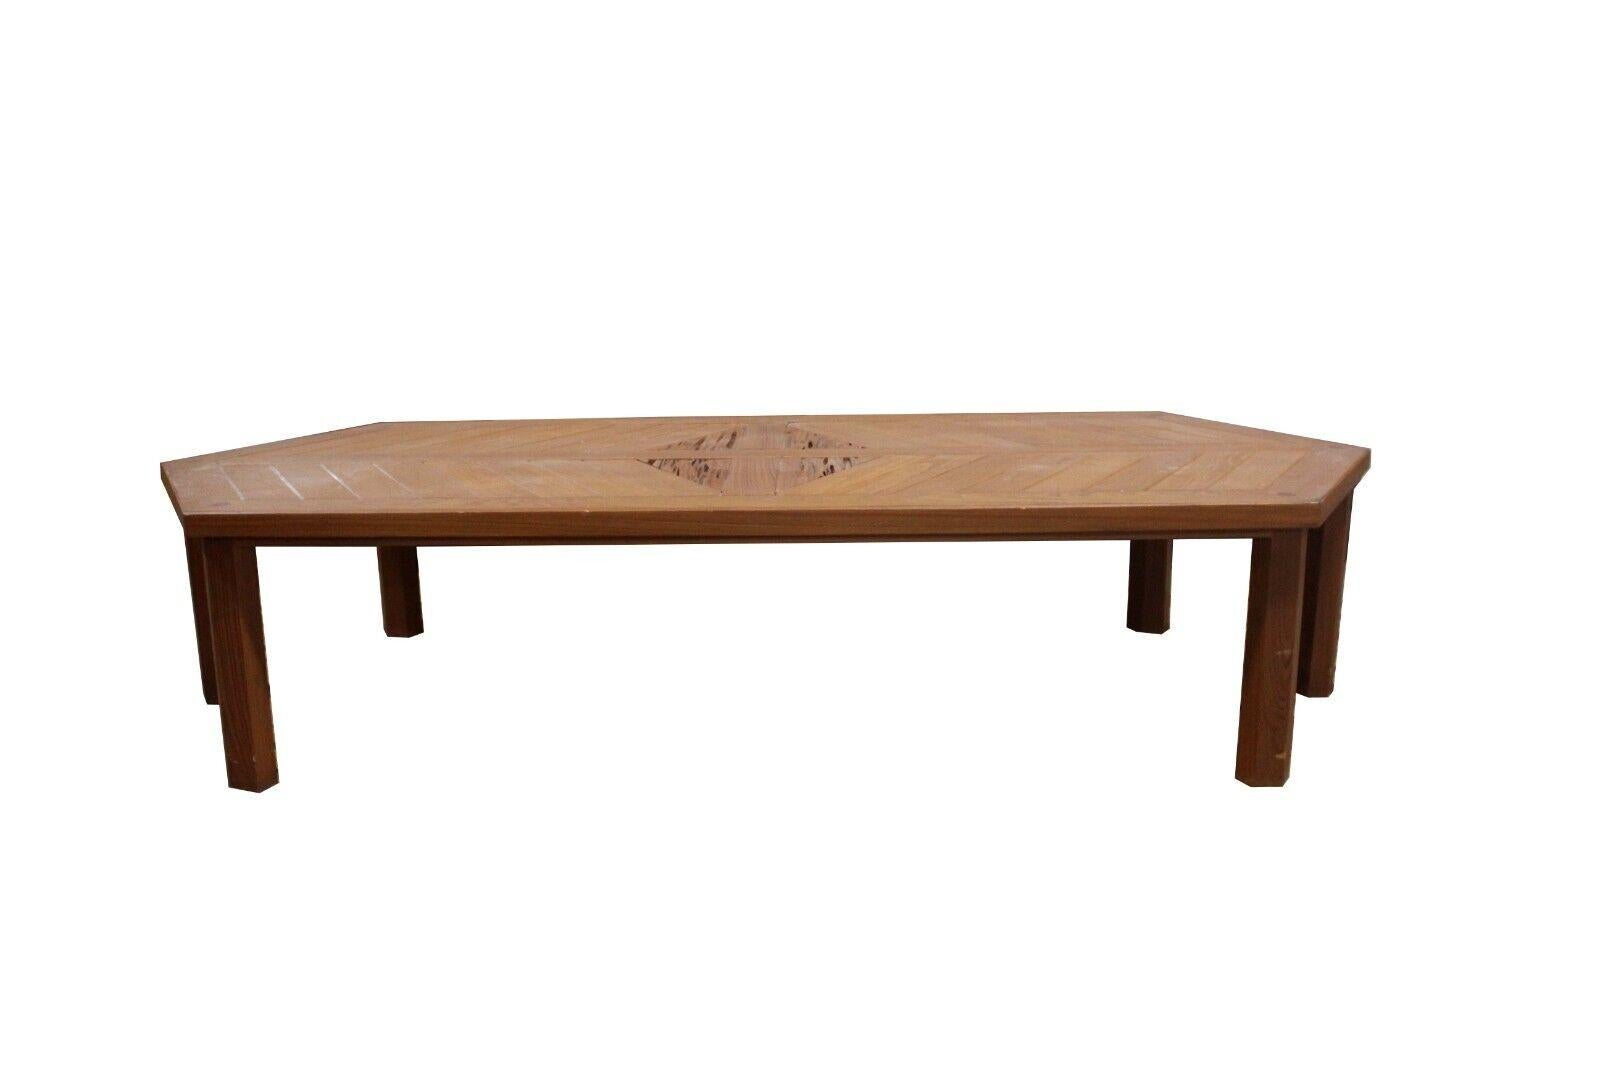 For your consideration is this custom made Pecky Cypress wood coffee table with an inlaid geometric design. Dimensions 81